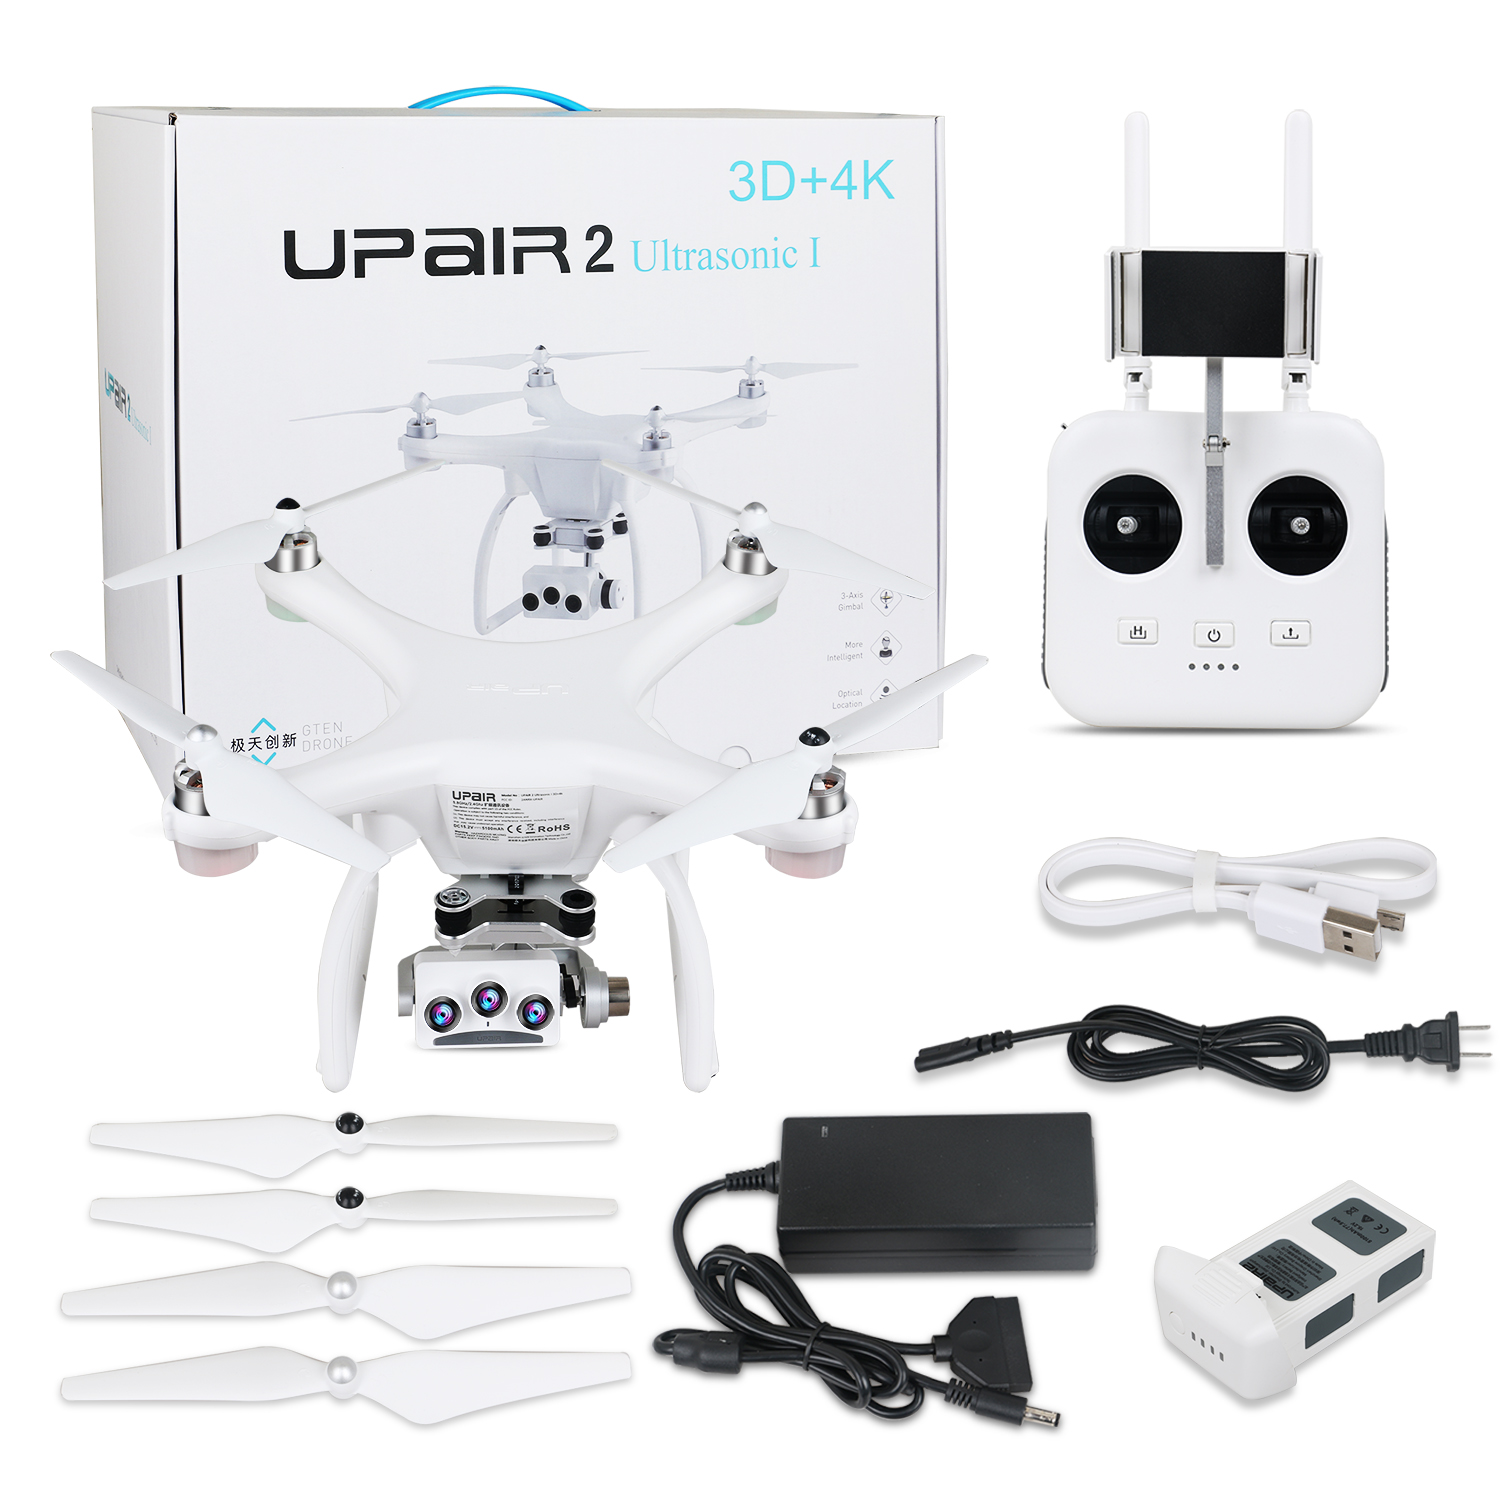 UPair-2-Ultrasonic-58G-WiFi-1KM-FPV-3D--4K--16MP-Camera-With-3-Axis-Gimbal-GPS-RC-Quadcopter-Drone-R-1440618-12